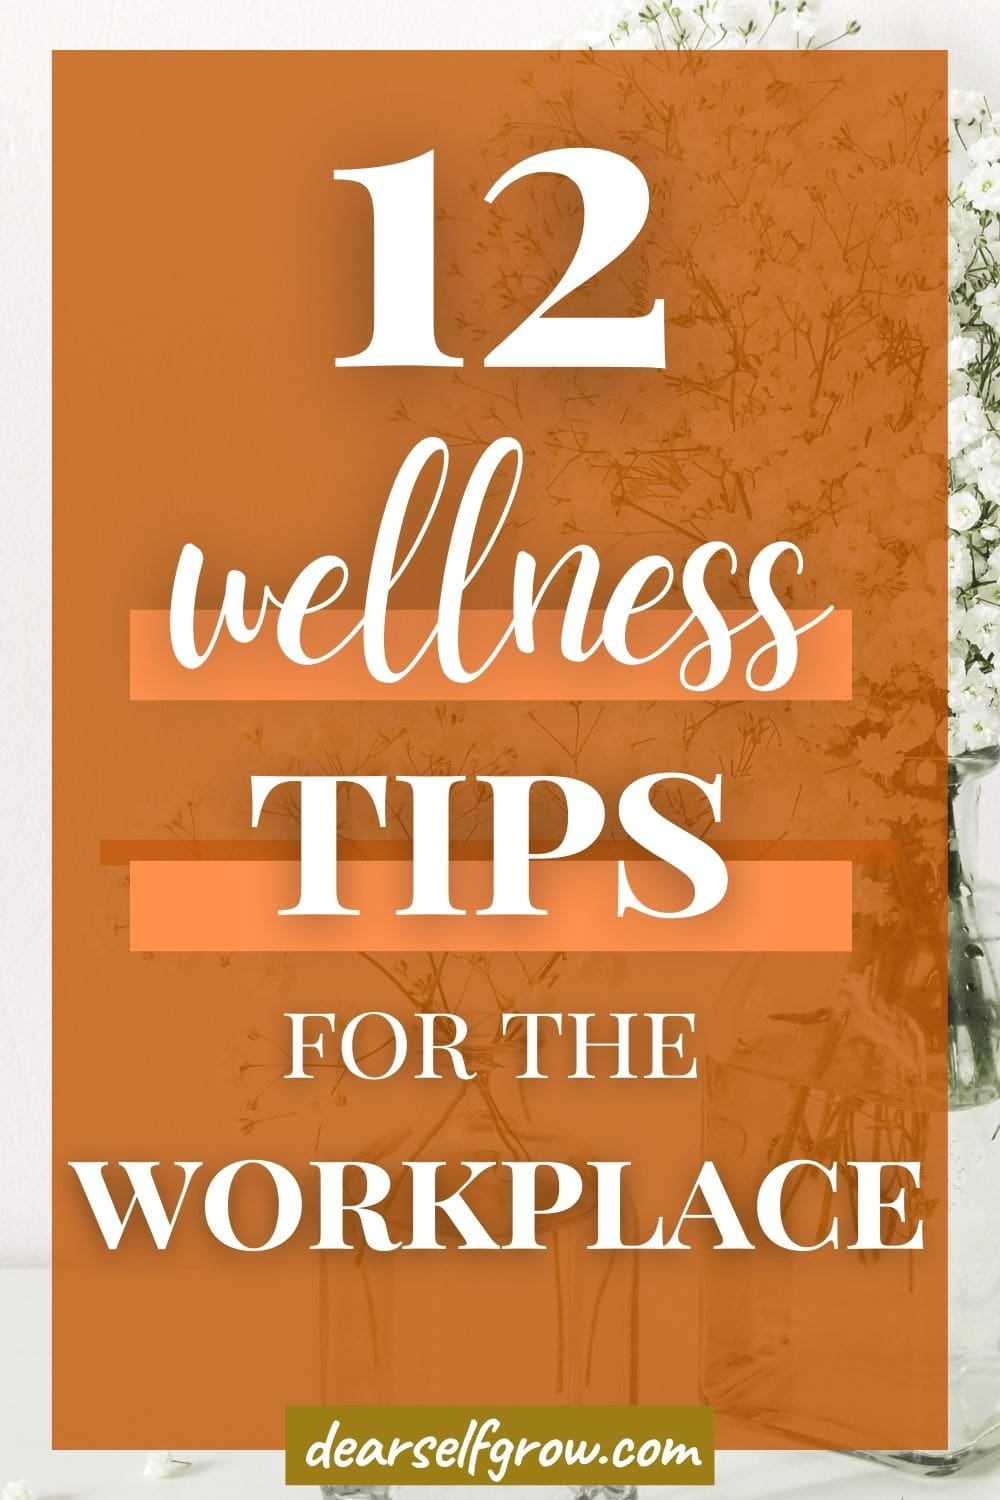 A flower in a vase with text overlay 12 wellness tips for the workplace. This image is pinnable.